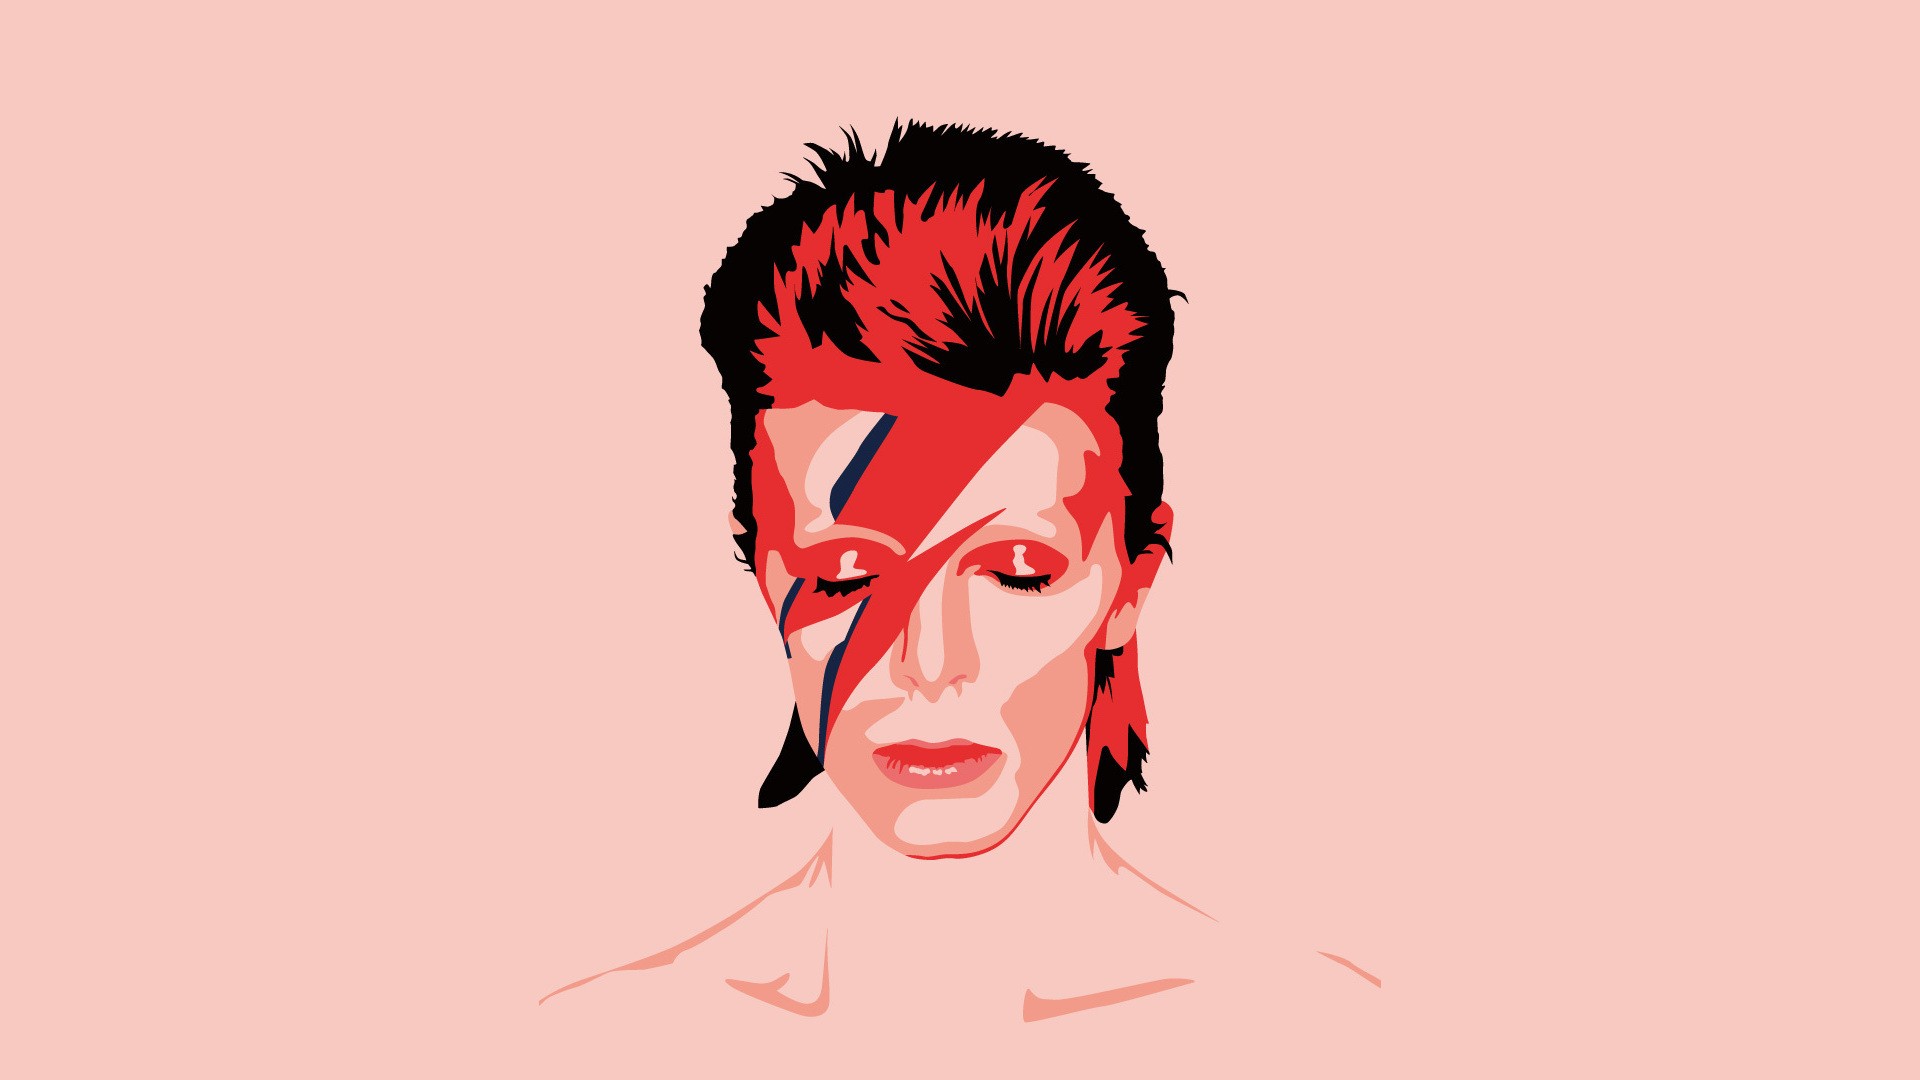 David Bowie Artwork Closed Eyes Simple Background 1920x1080